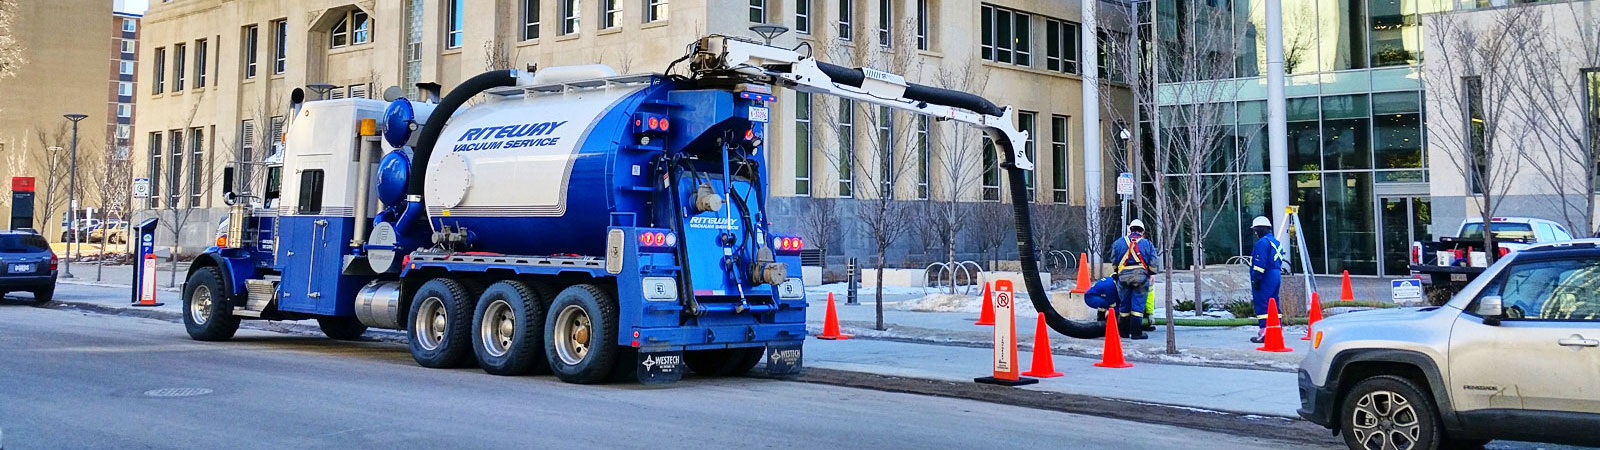 catch basin and sump cleaning with tandem vac trucks